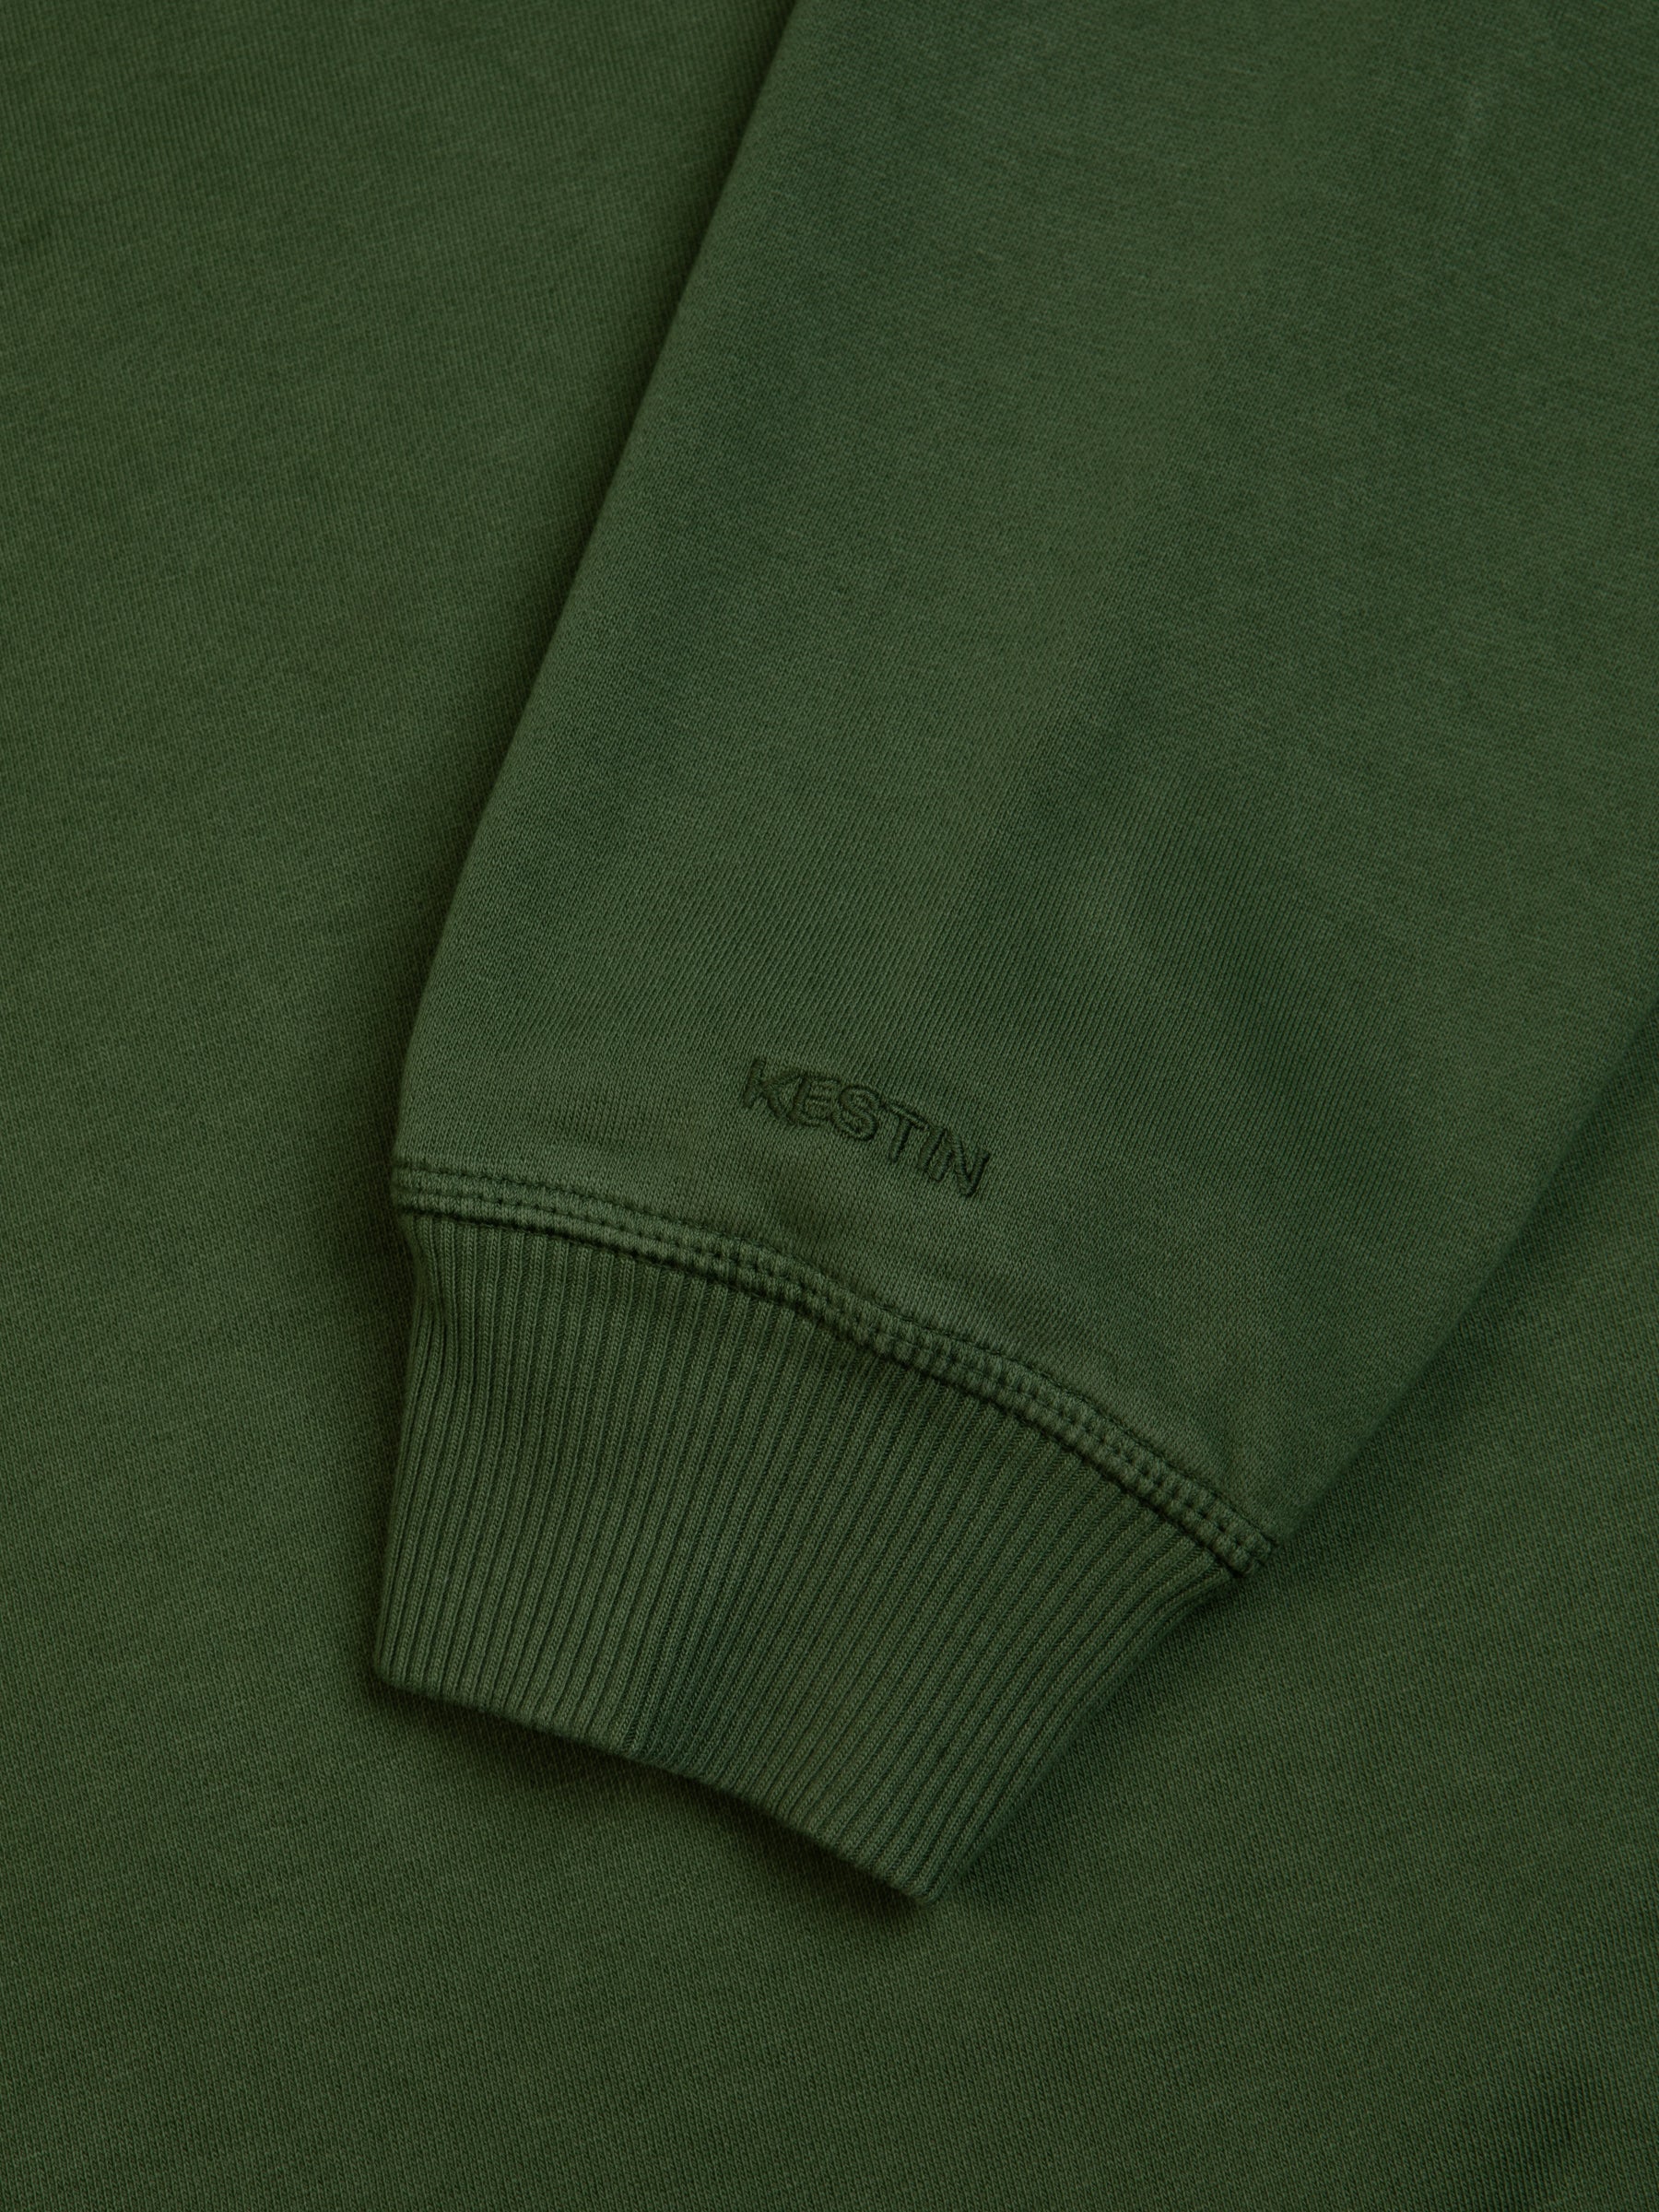 A garment dyed green sweatshirt with a logo embroidered to the ribbed cuff.